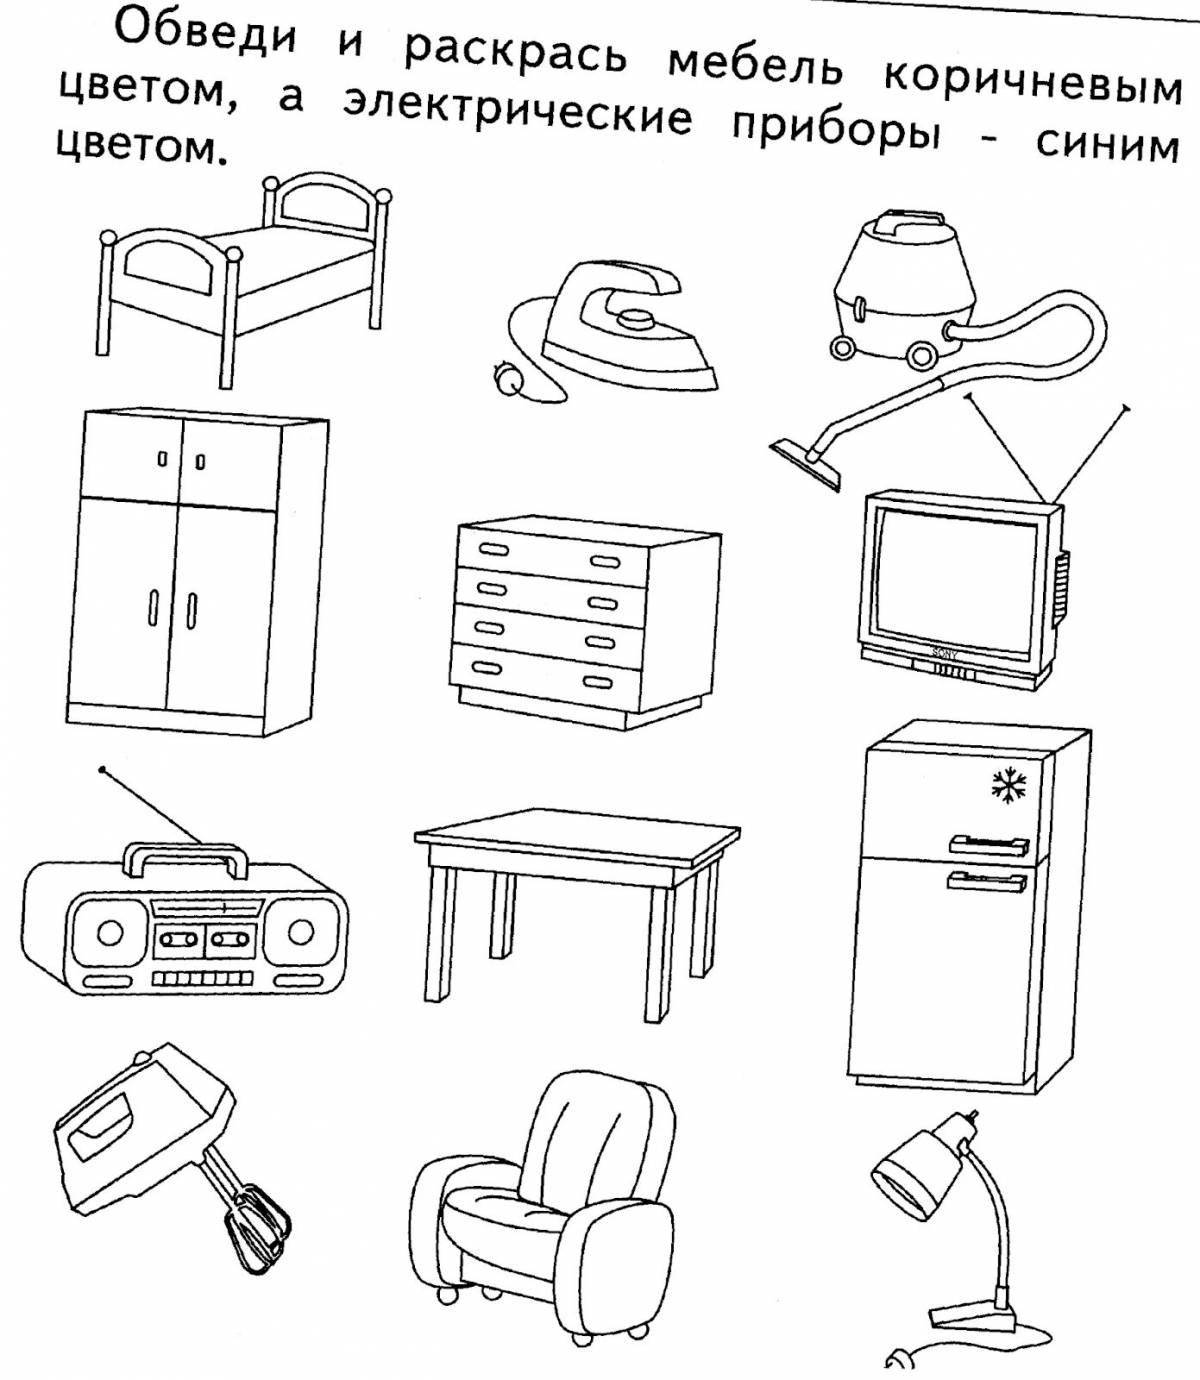 Colorful page of furniture for the elderly